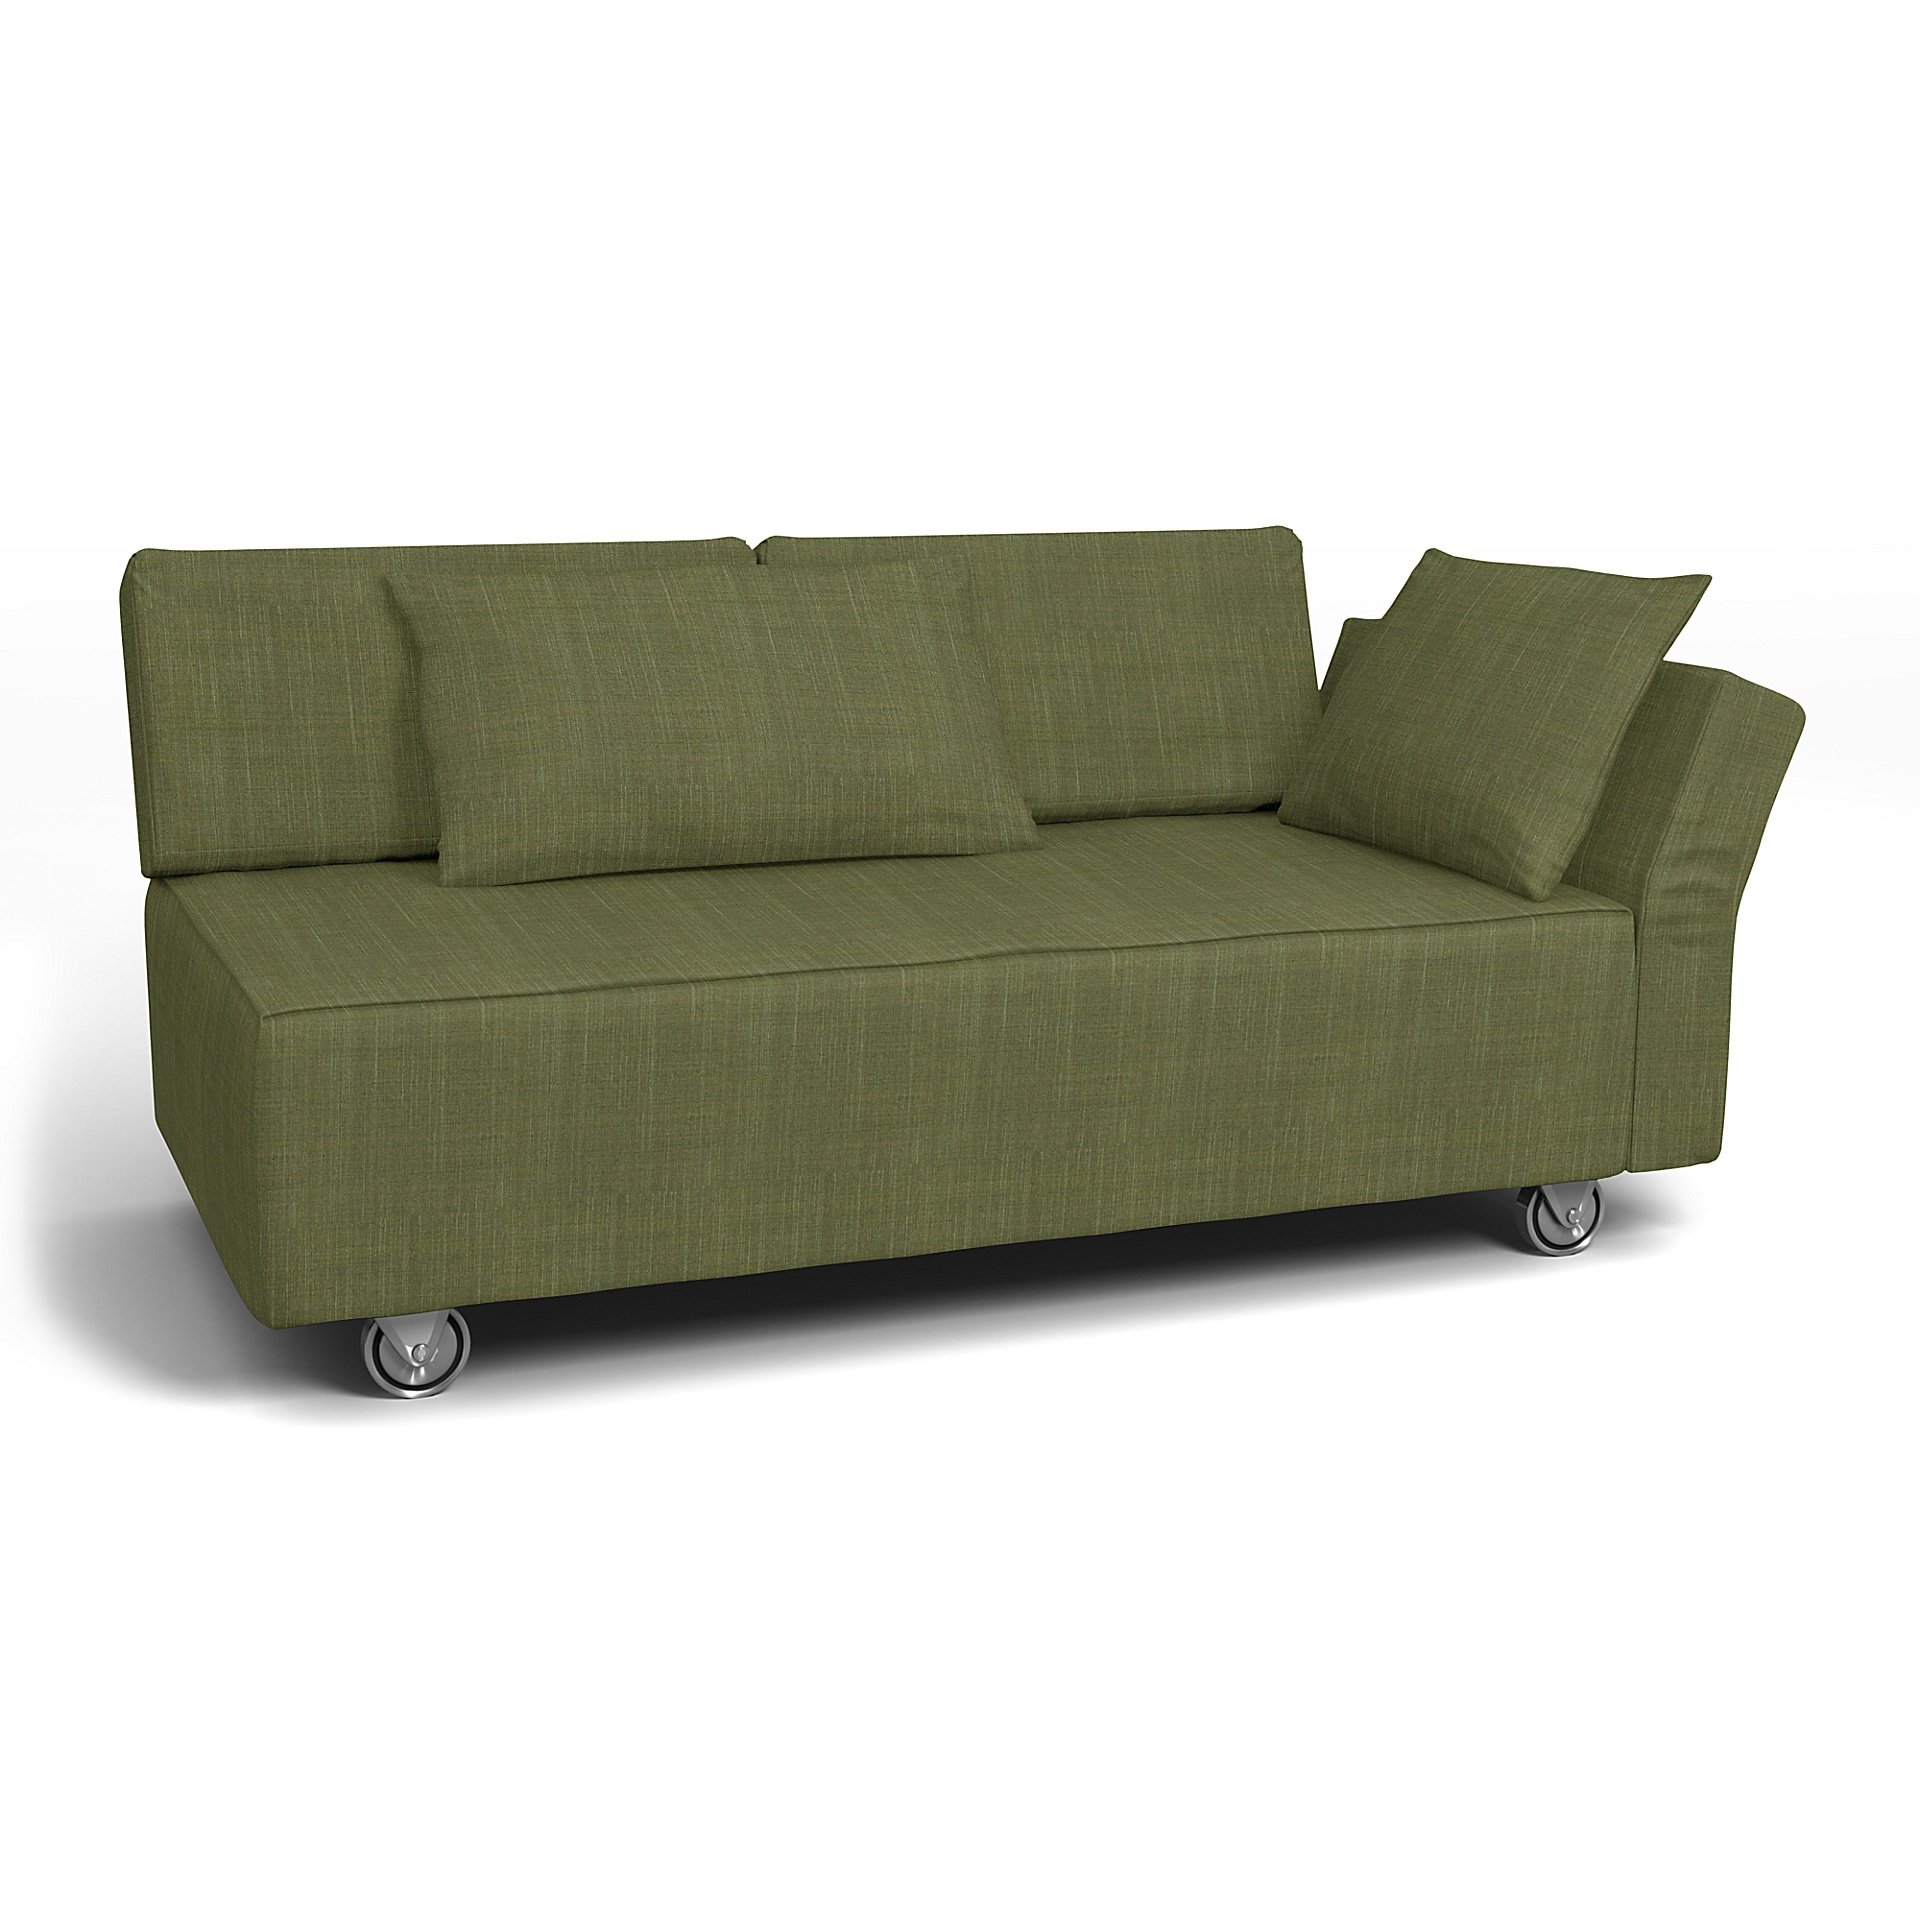 IKEA - Falsterbo 2 Seat Sofa with Right Arm Cover, Moss Green, Boucle & Texture - Bemz